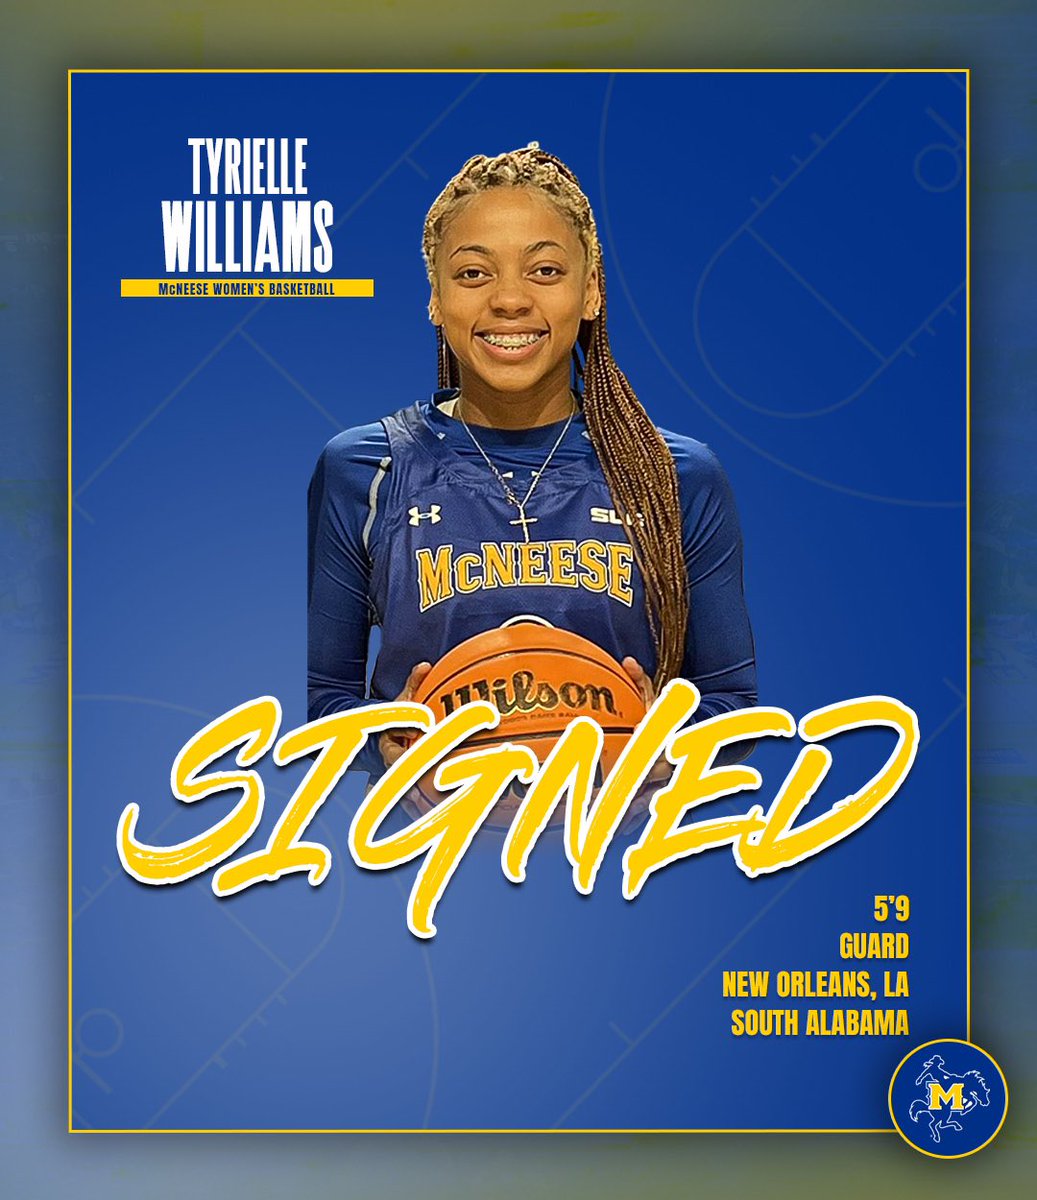 𝐒𝐈𝐆𝐍𝐄𝐃 ✍️ Welcome to Cowgirl Country, Tyrielle! #GeauxPokes